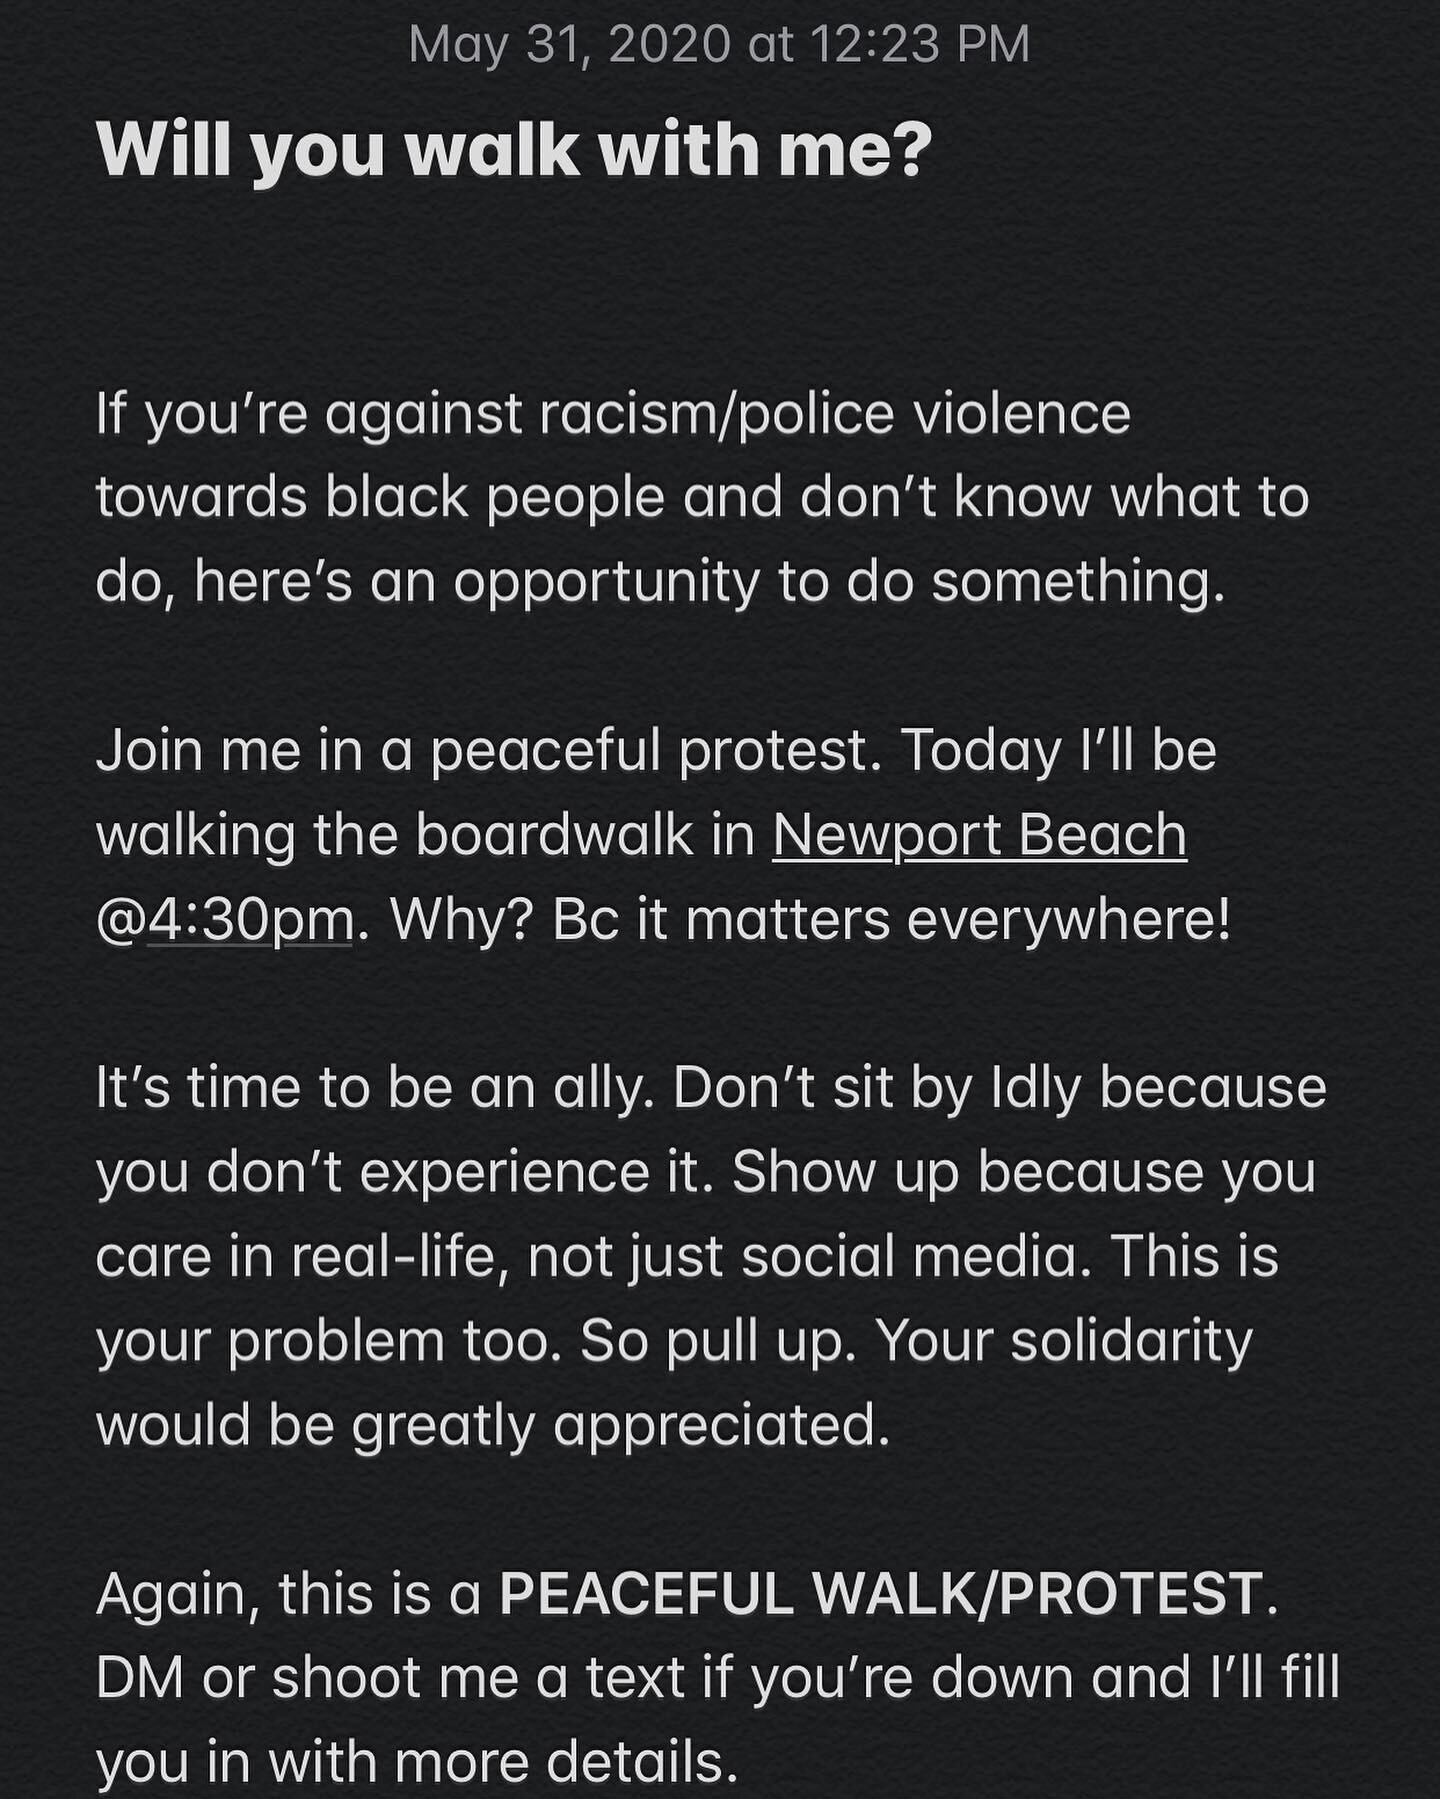 If you feel something, do something. Don&rsquo;t stay silent. We need you.

#justiceforgeorgefloyd #justiceforahmaud 
#speakup #showup #orangecounty #newportbeach #pullup